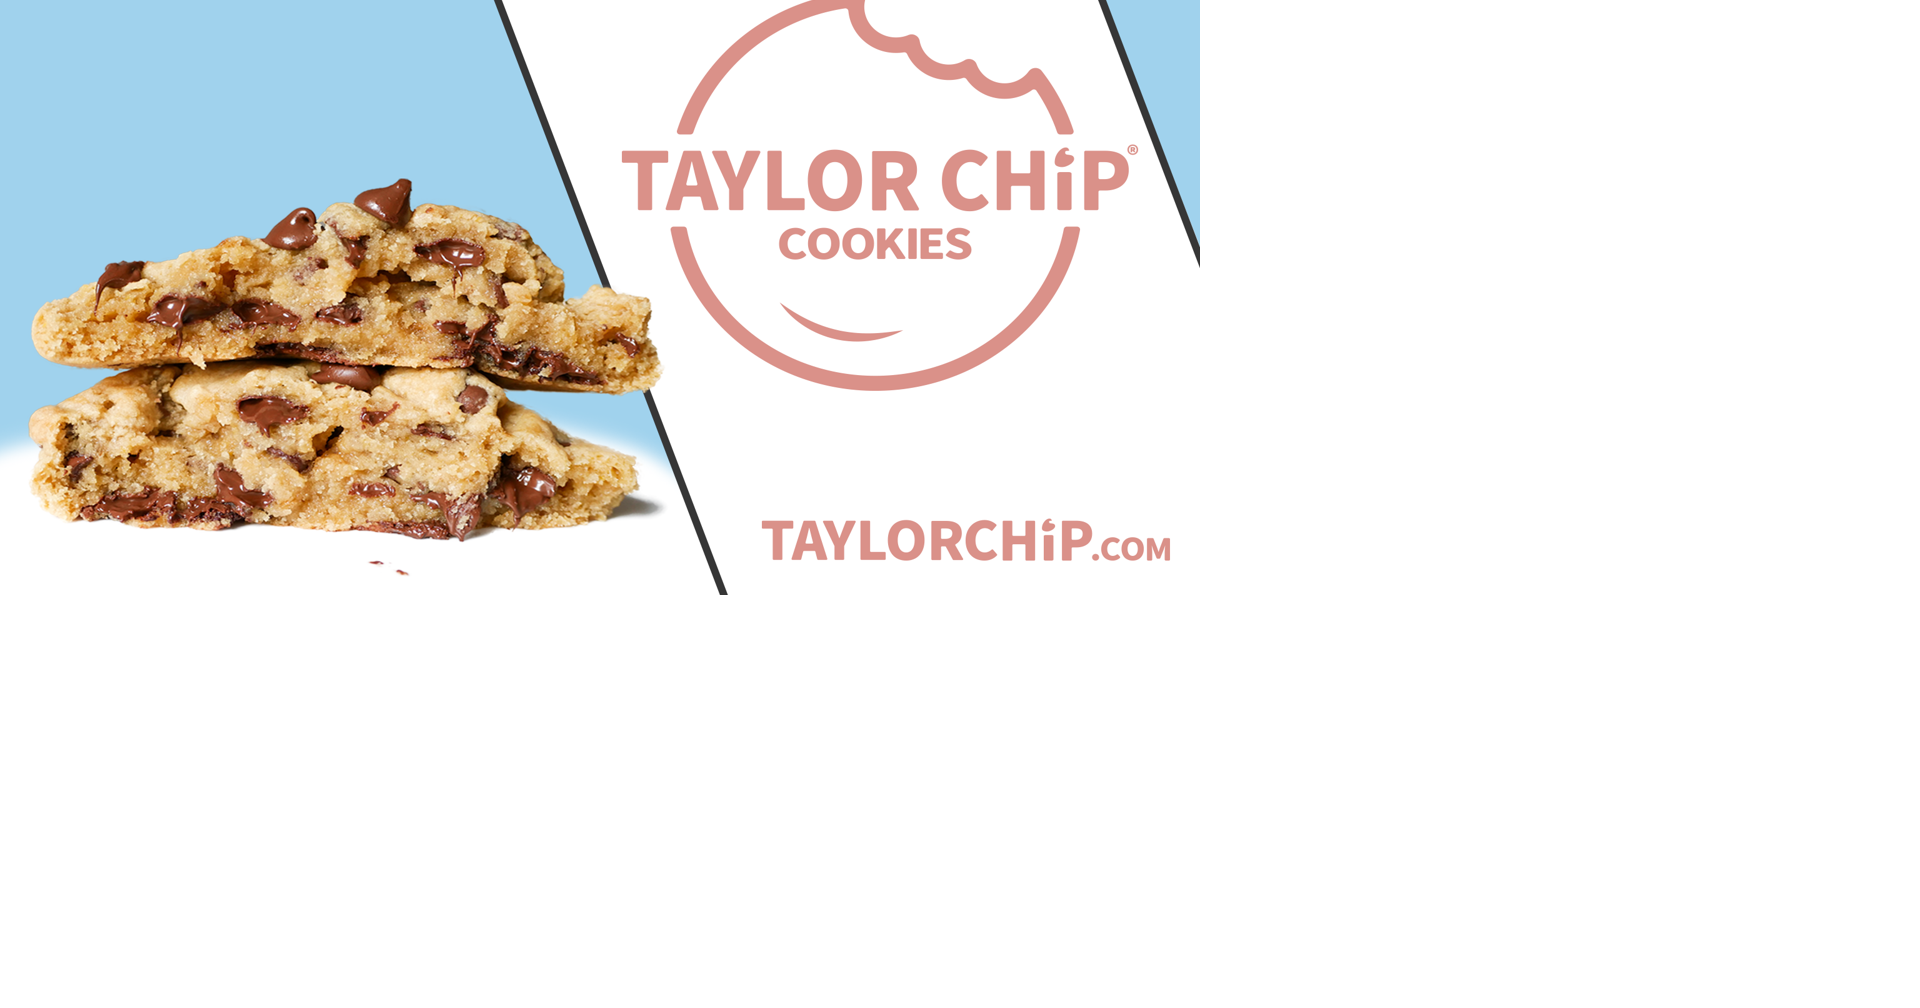 4. Taylor Chip Cookies Promotions - wide 5